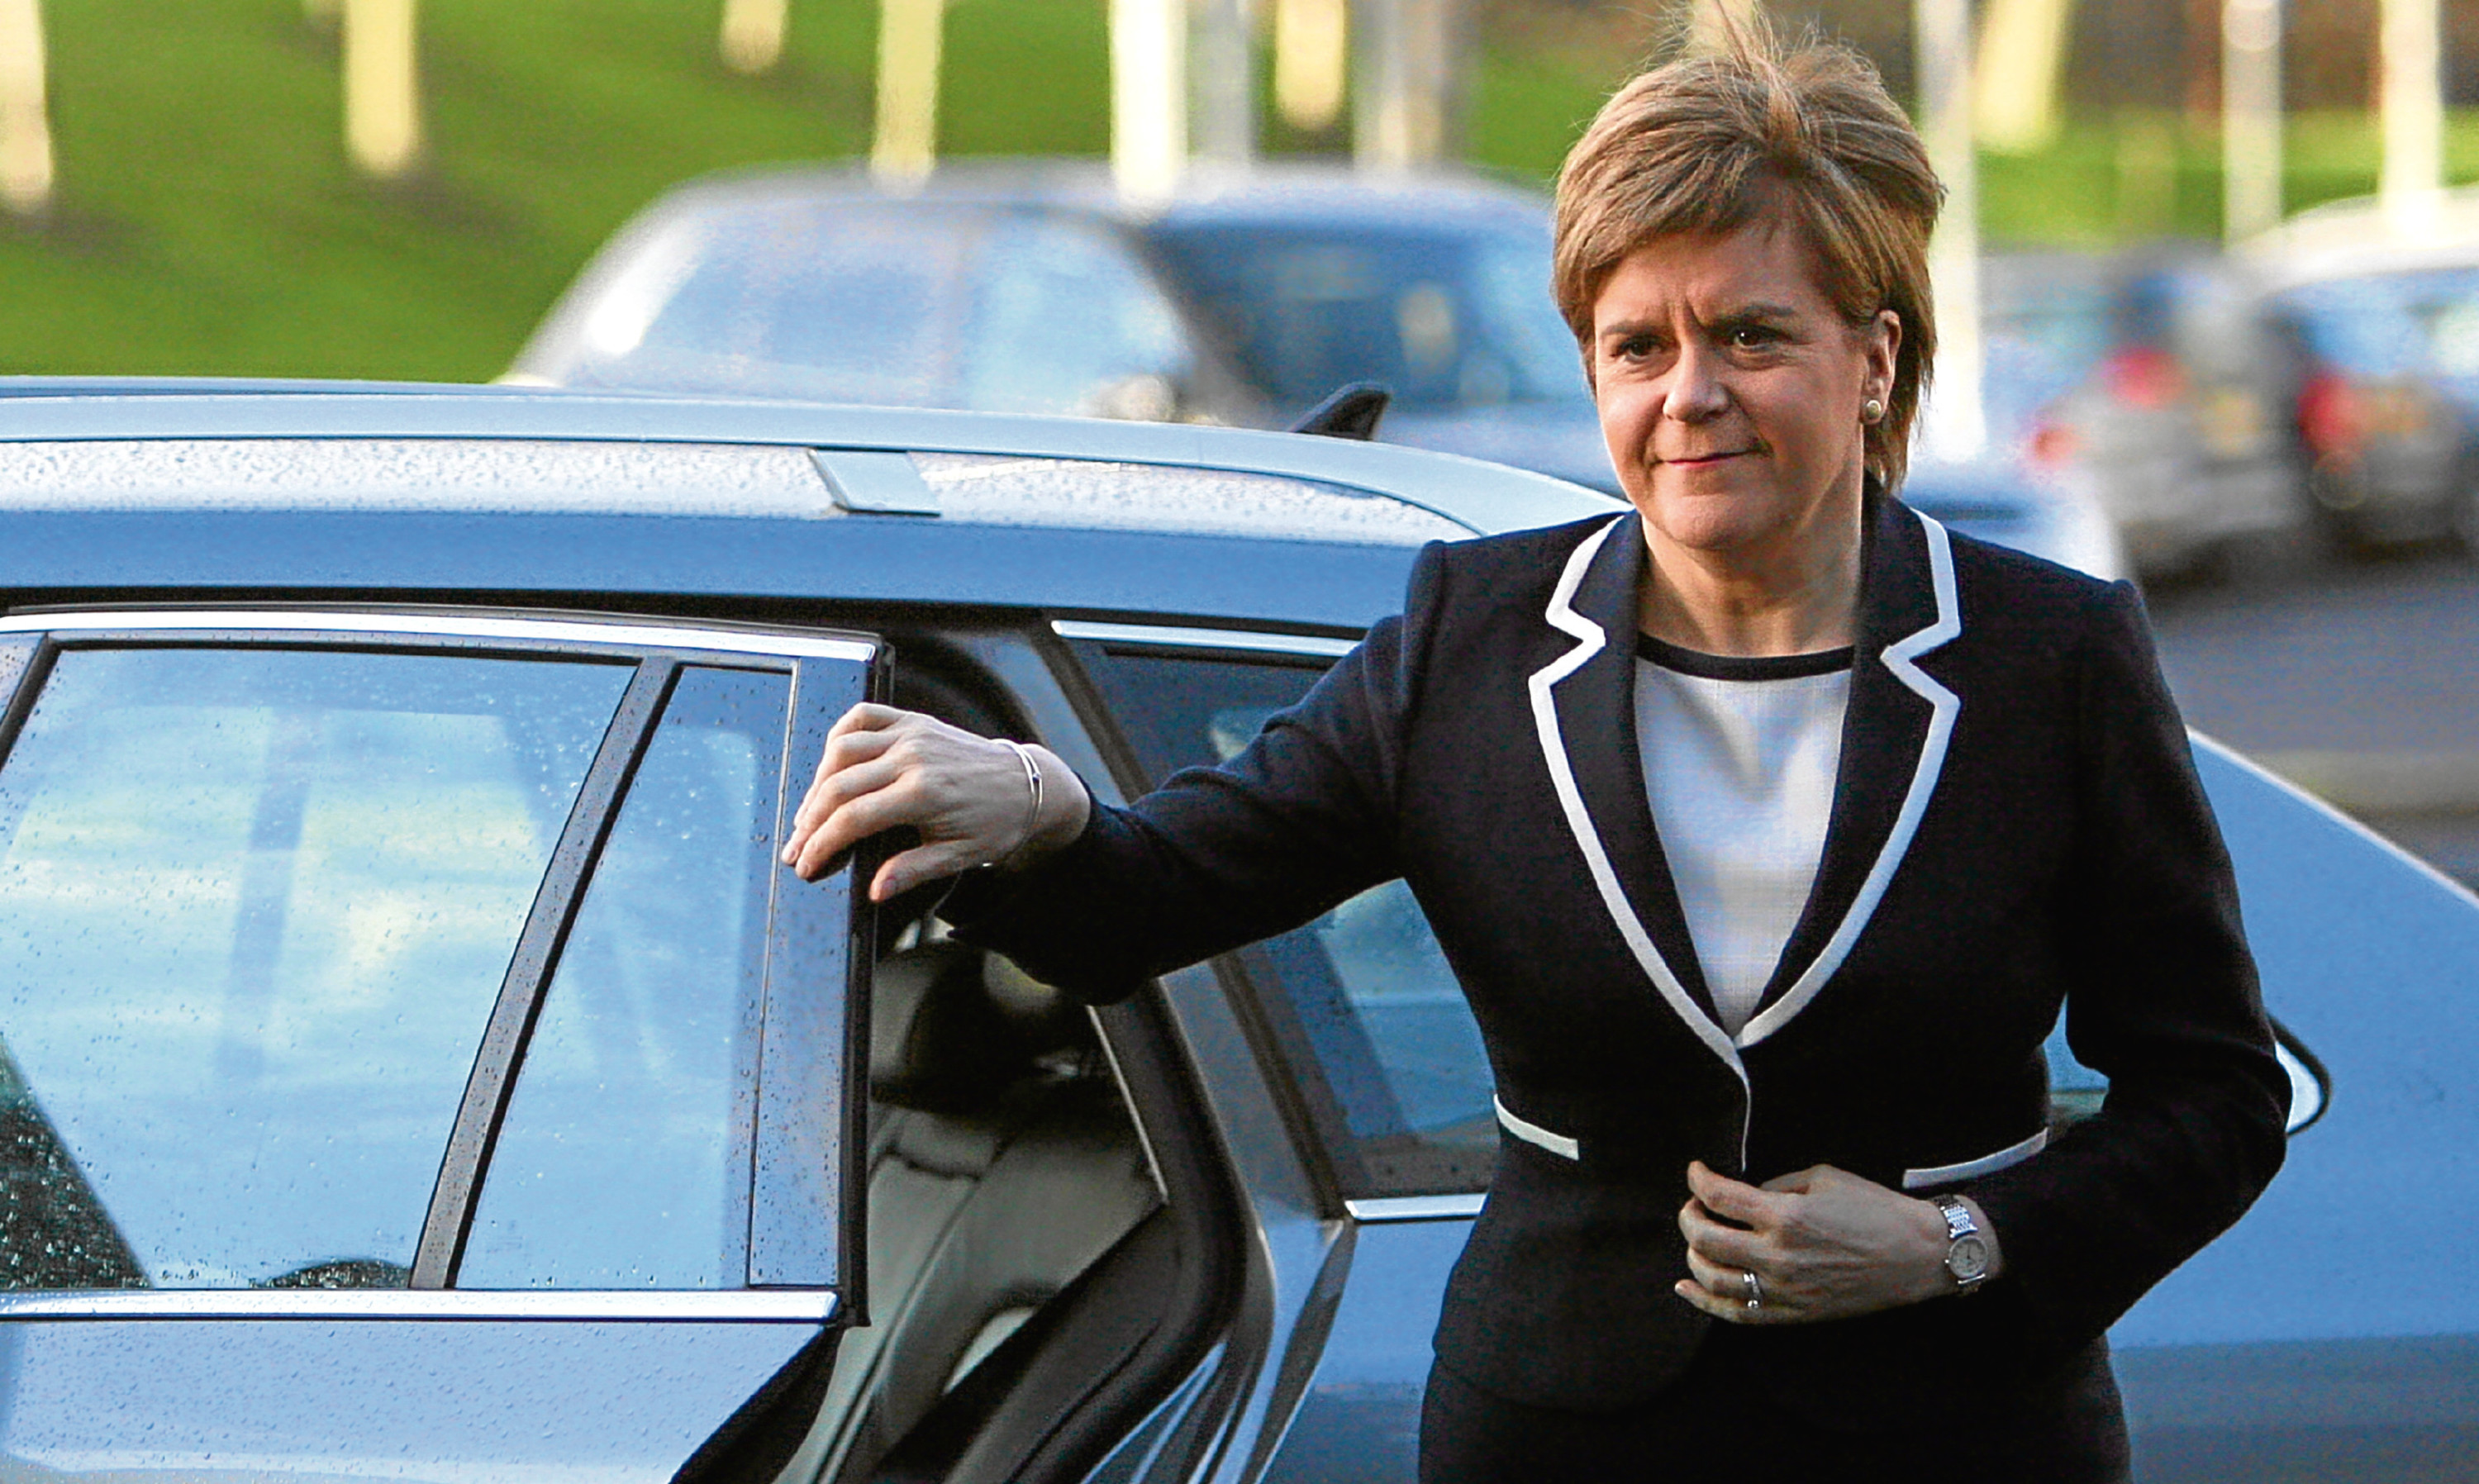 Nicola Sturgeon has issued various threats over Brexit but Alex can see no real reason why Theresa May's Westminster government should take much notice.